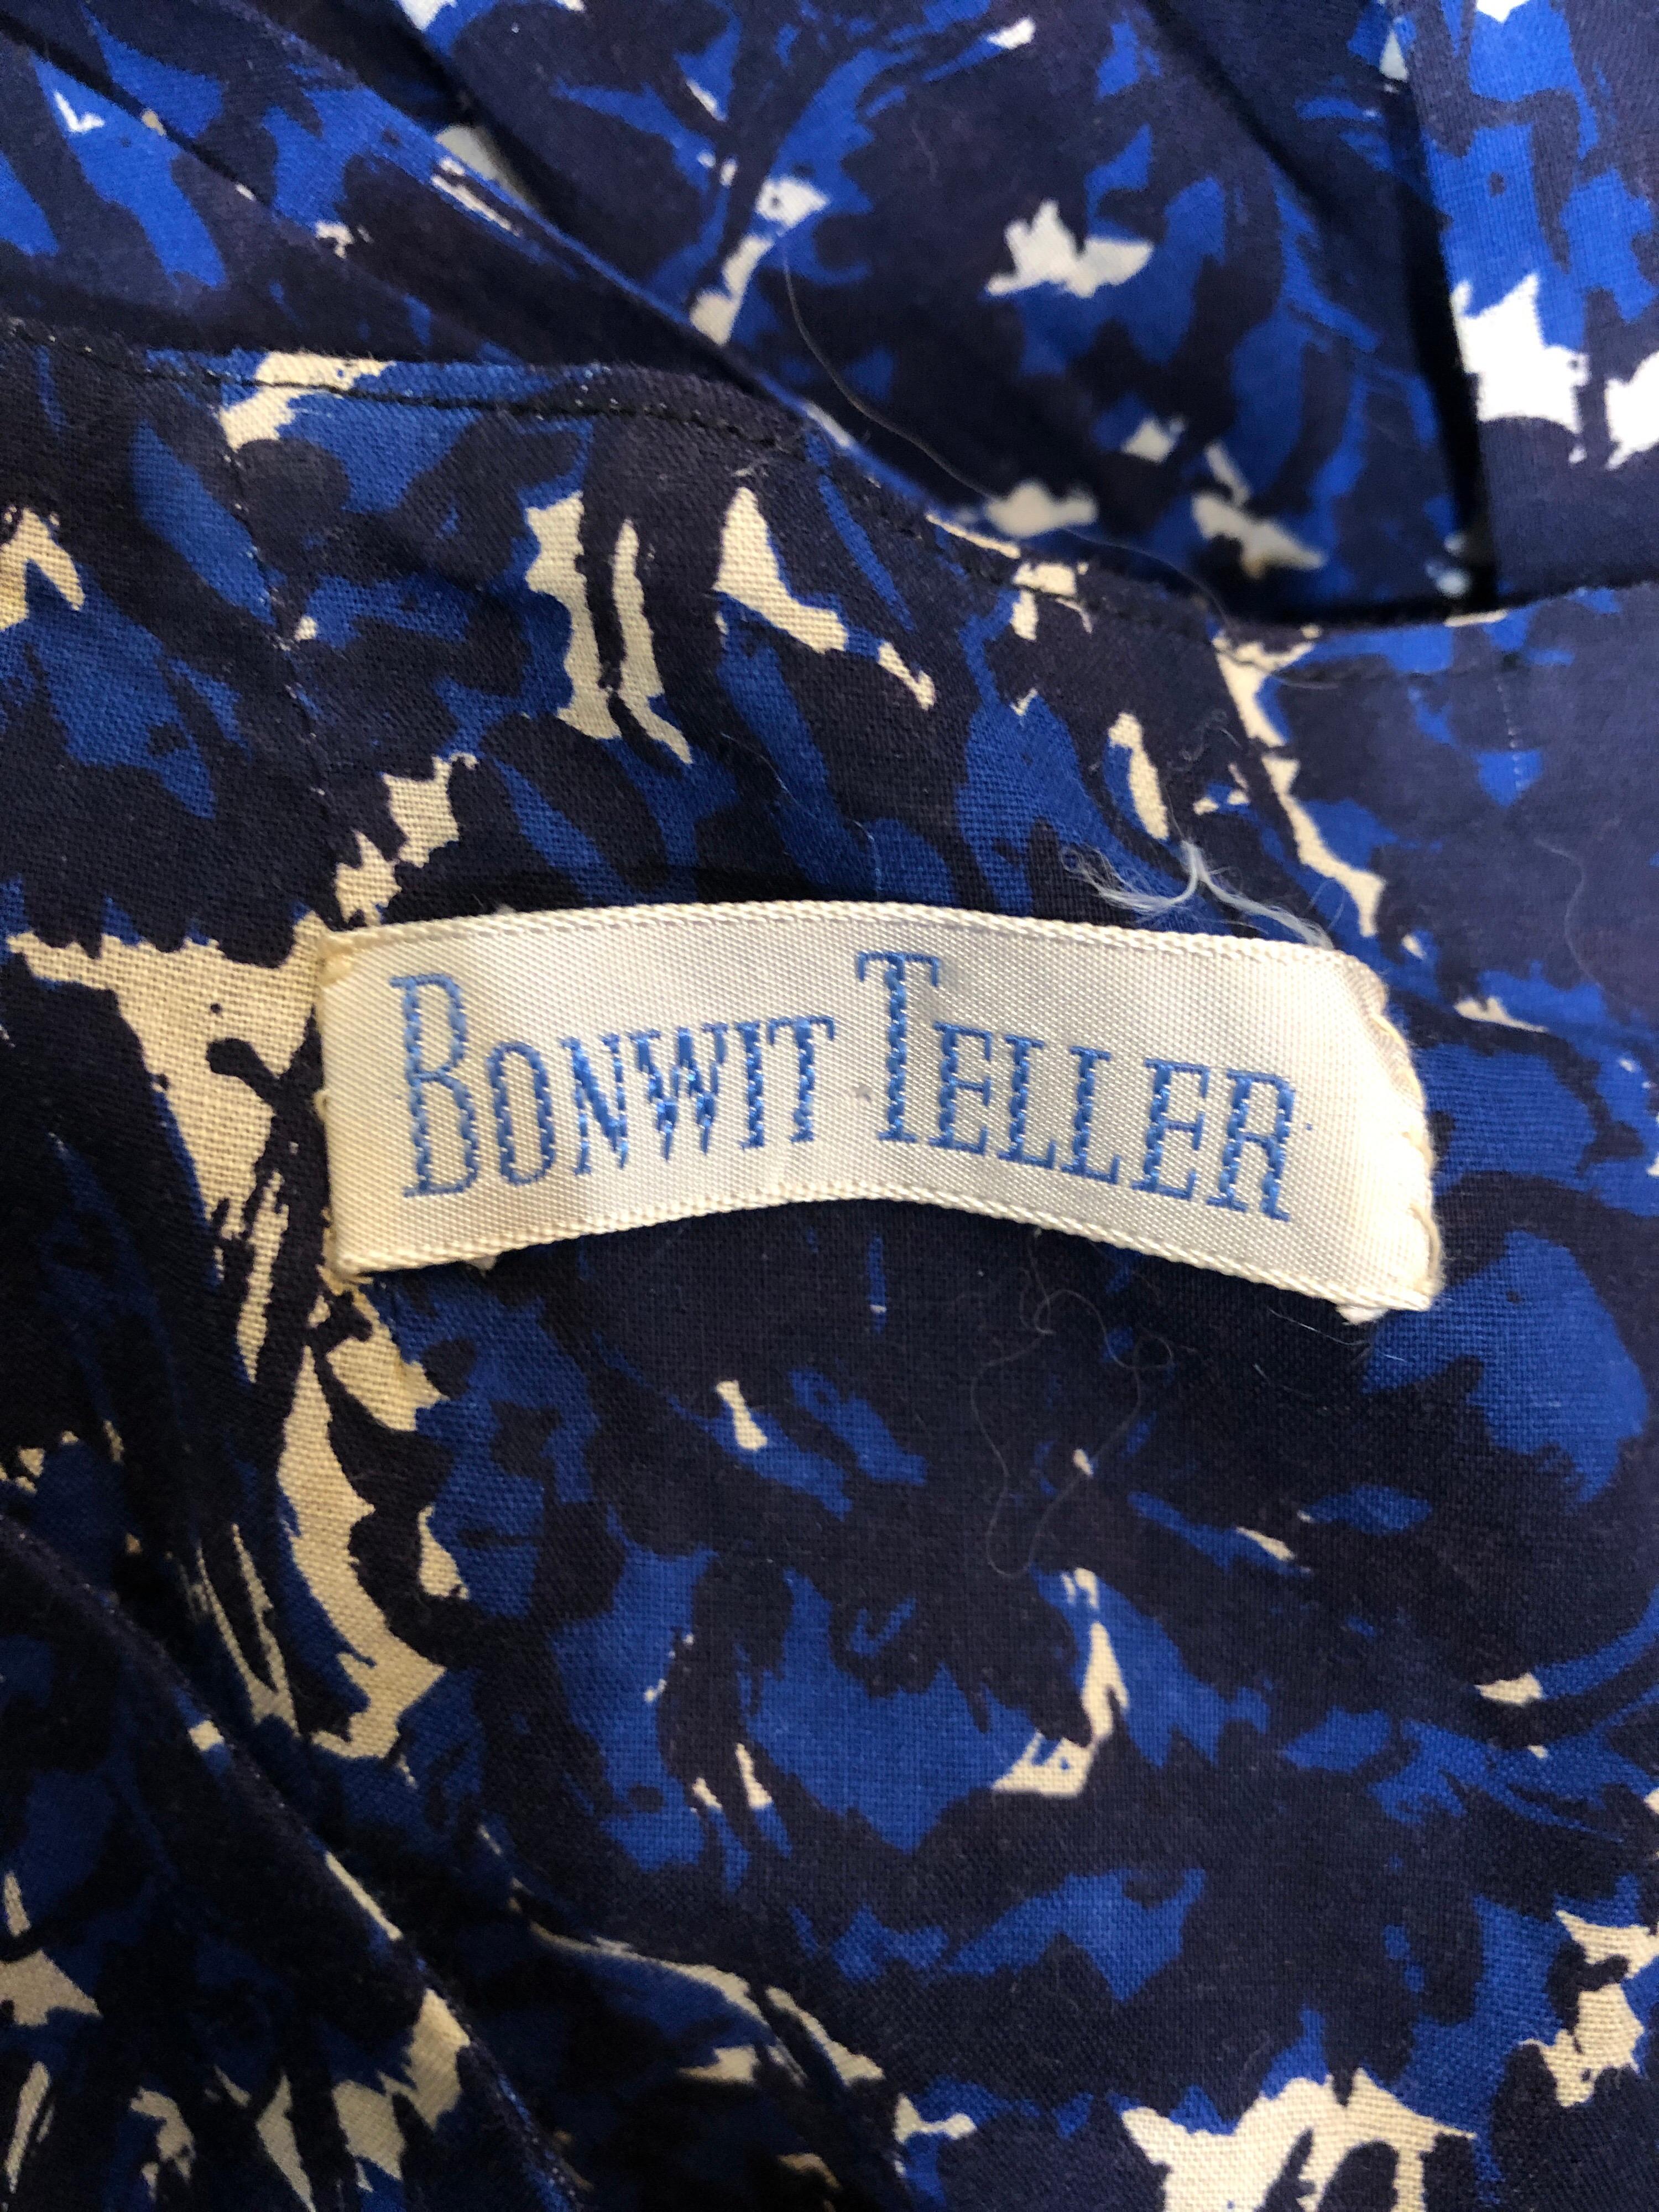 1950s Bonwit Teller Demi Couture Blue Abstract Floral Fit n' Flare Vintage Dress For Sale 8